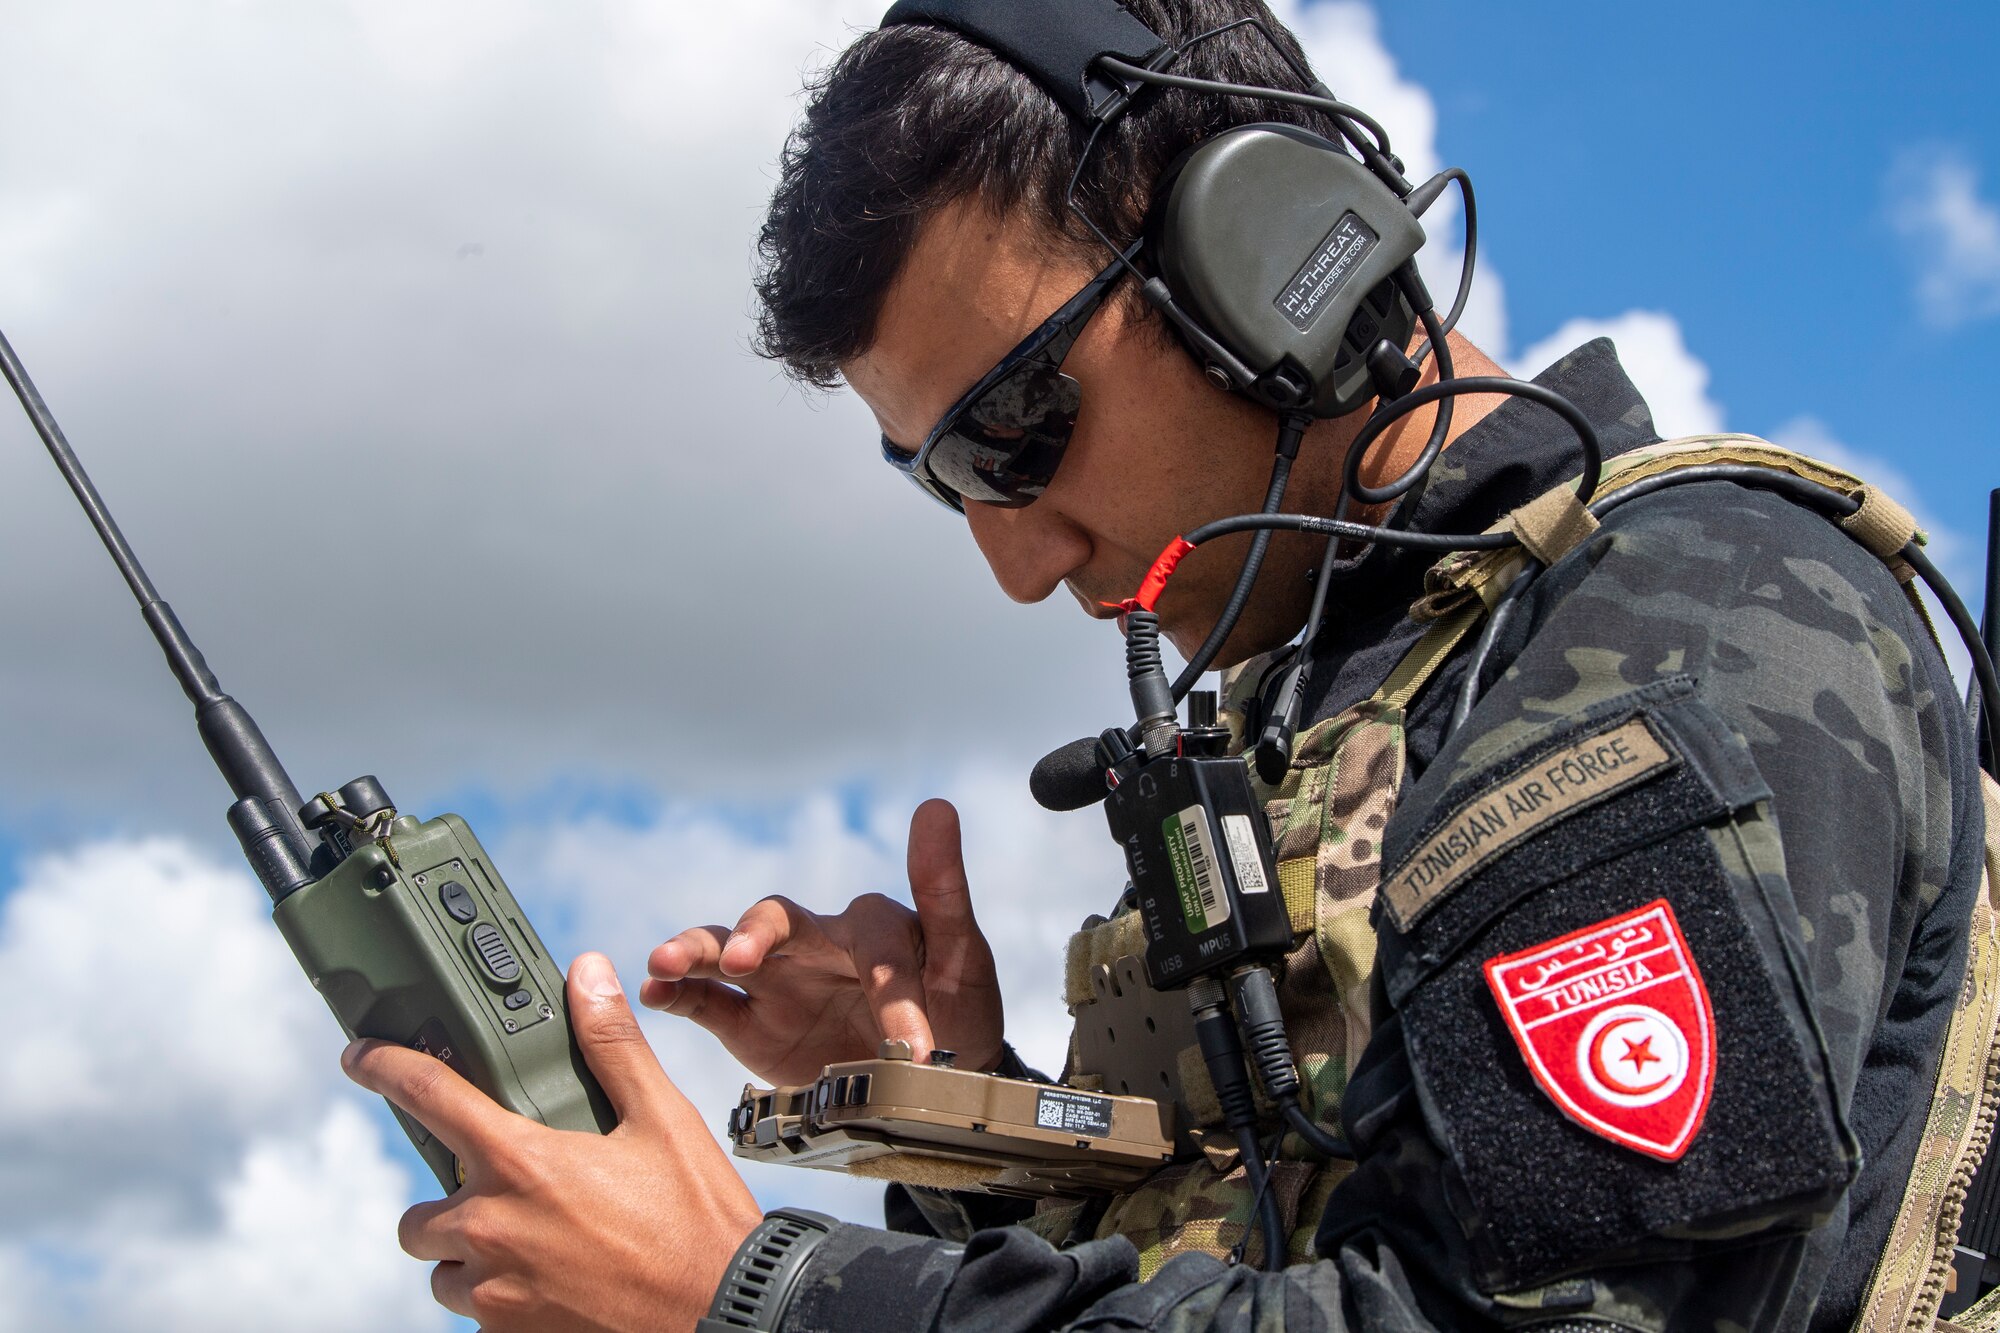 Tunisian air force 1st Lt. Hsan Gabtni, joint terminal attack controller, communicates with U.S. and Tunisian Air Force pilots via the Airborne Extensible Relay Over-Horizon Network at Avon Park Air Force Range, Florida, May 12, 2022. The U.S. Air Force partnered with Colombia, Tunisia, Nigeria, and Thailand to co-develop tactics, techniques and procedures to combat violent extremist organizations while demonstrating the capabilities of the Airborne Extensible Relay Over-Horizon Network. (U.S. Air Force photo by Airman 1st Class Deanna Muir)